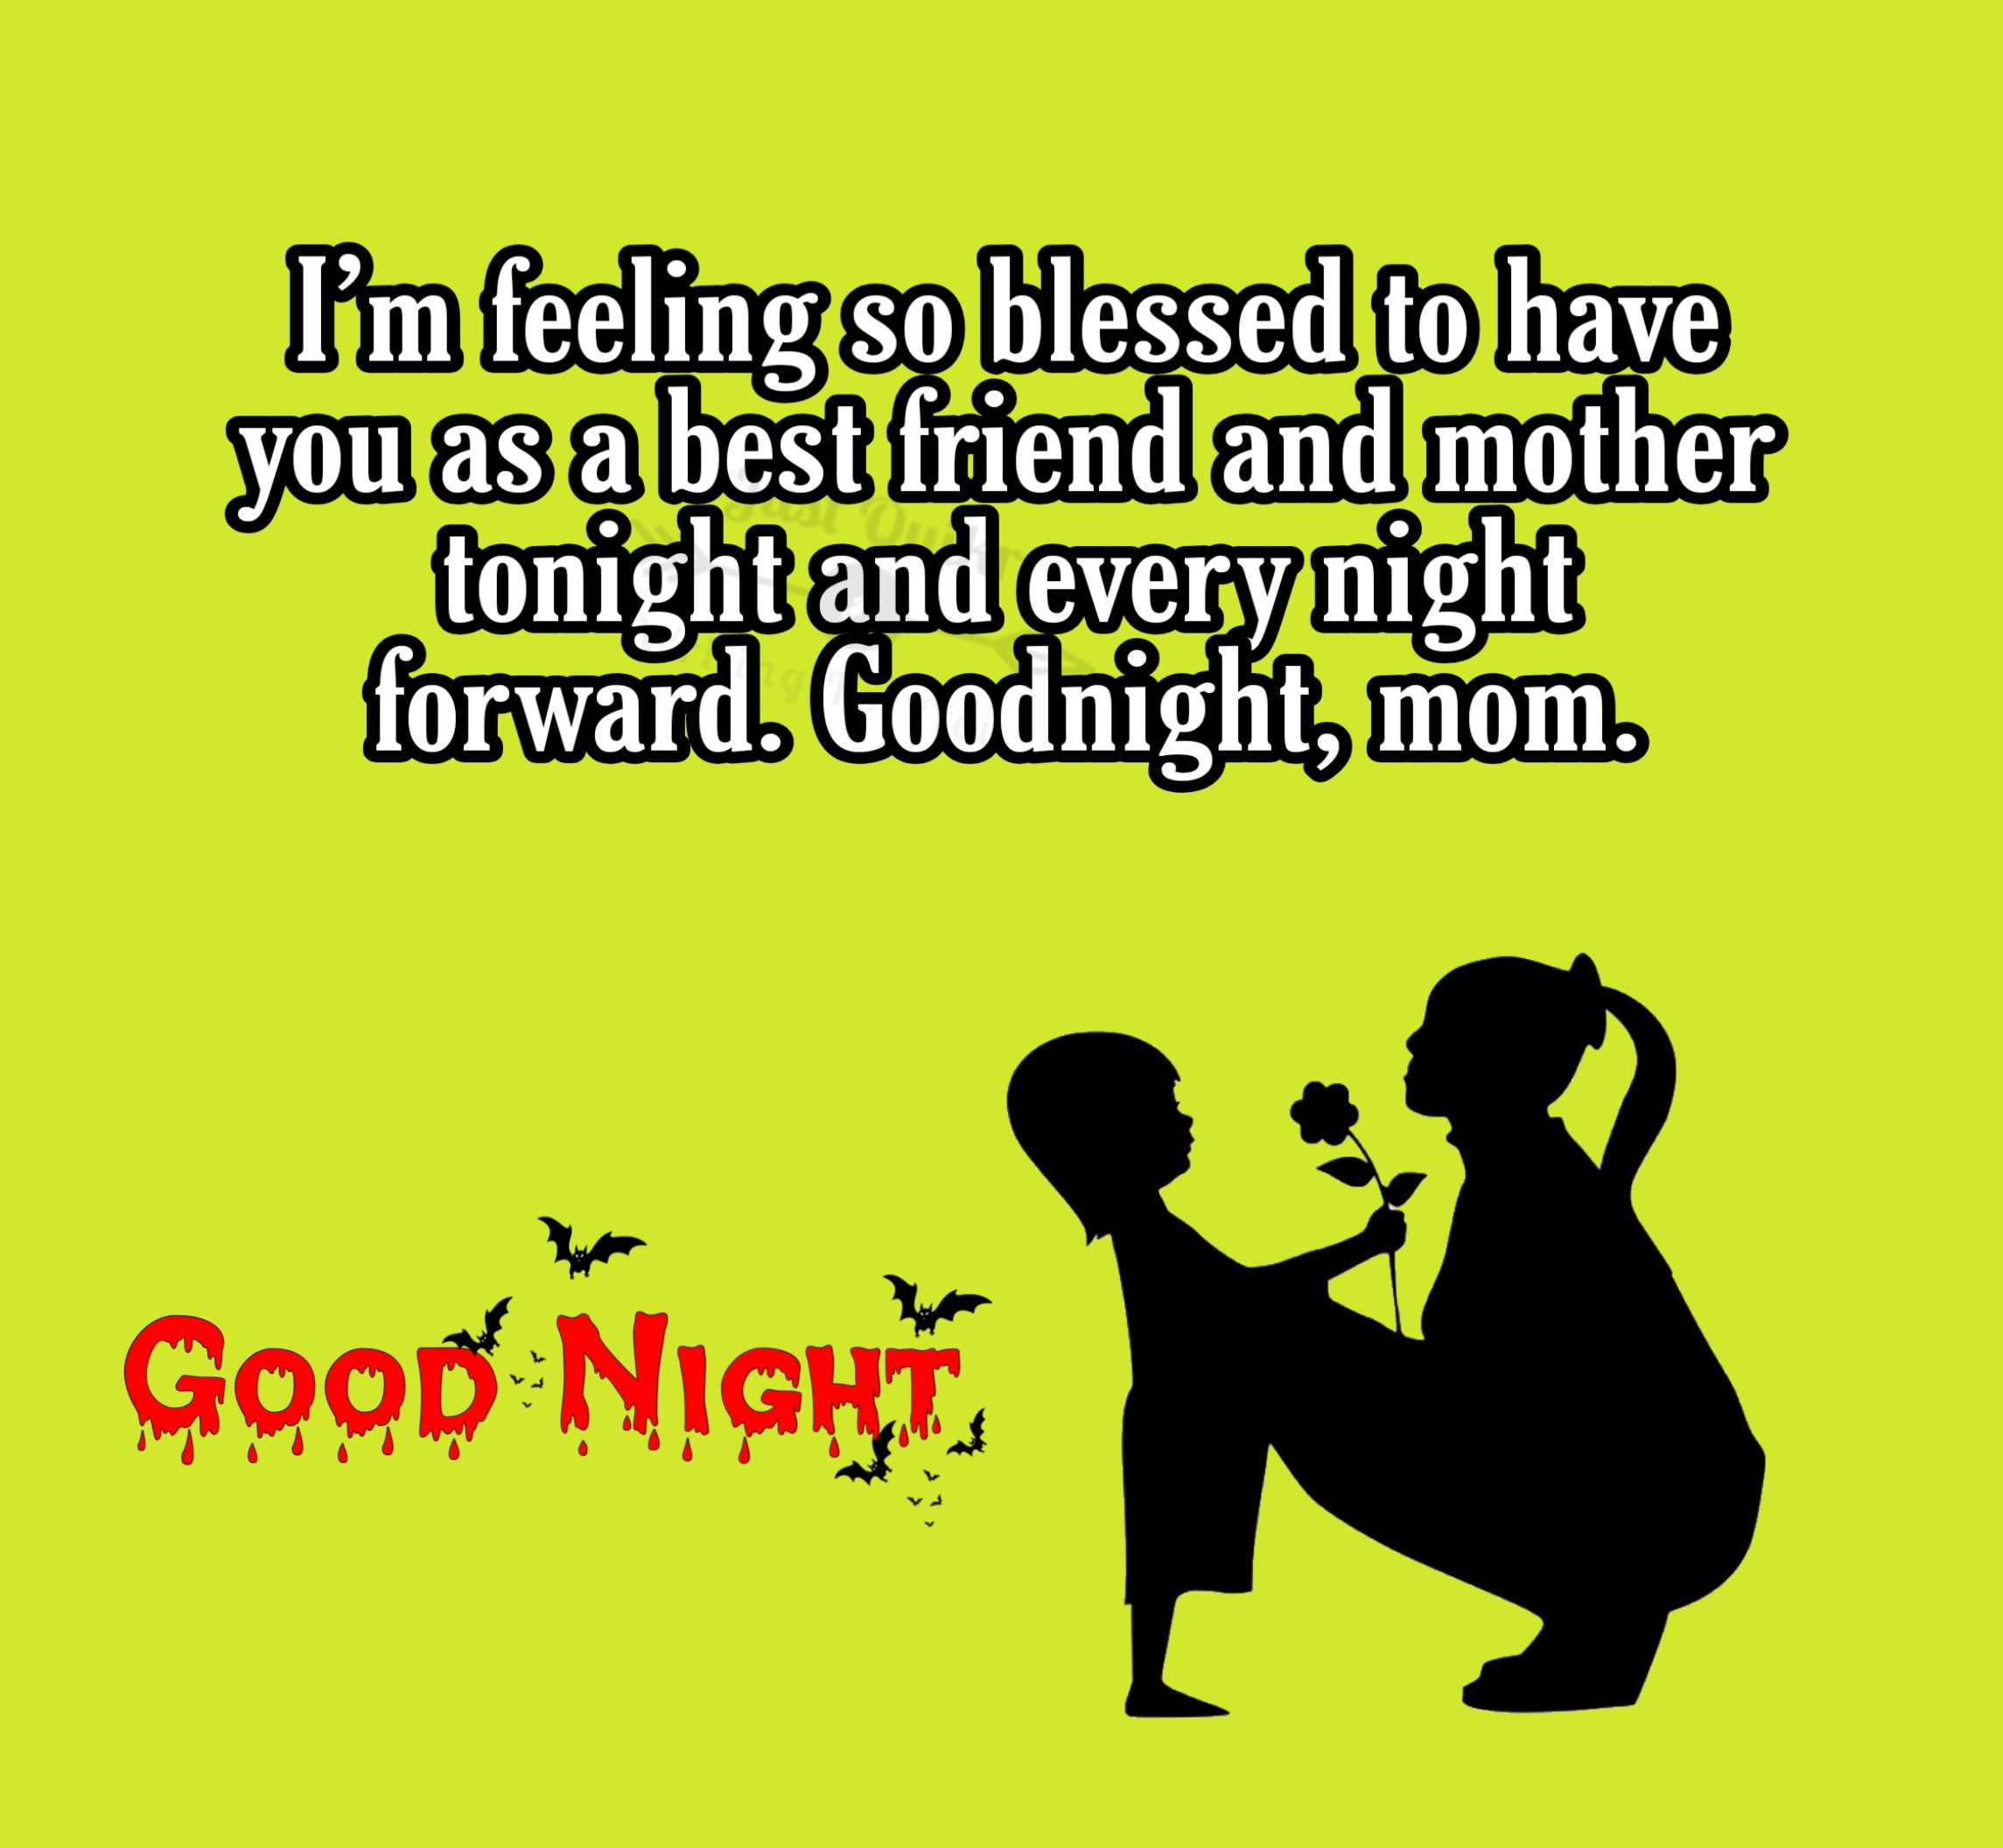 Good Night HD Pics Images For My Mom 